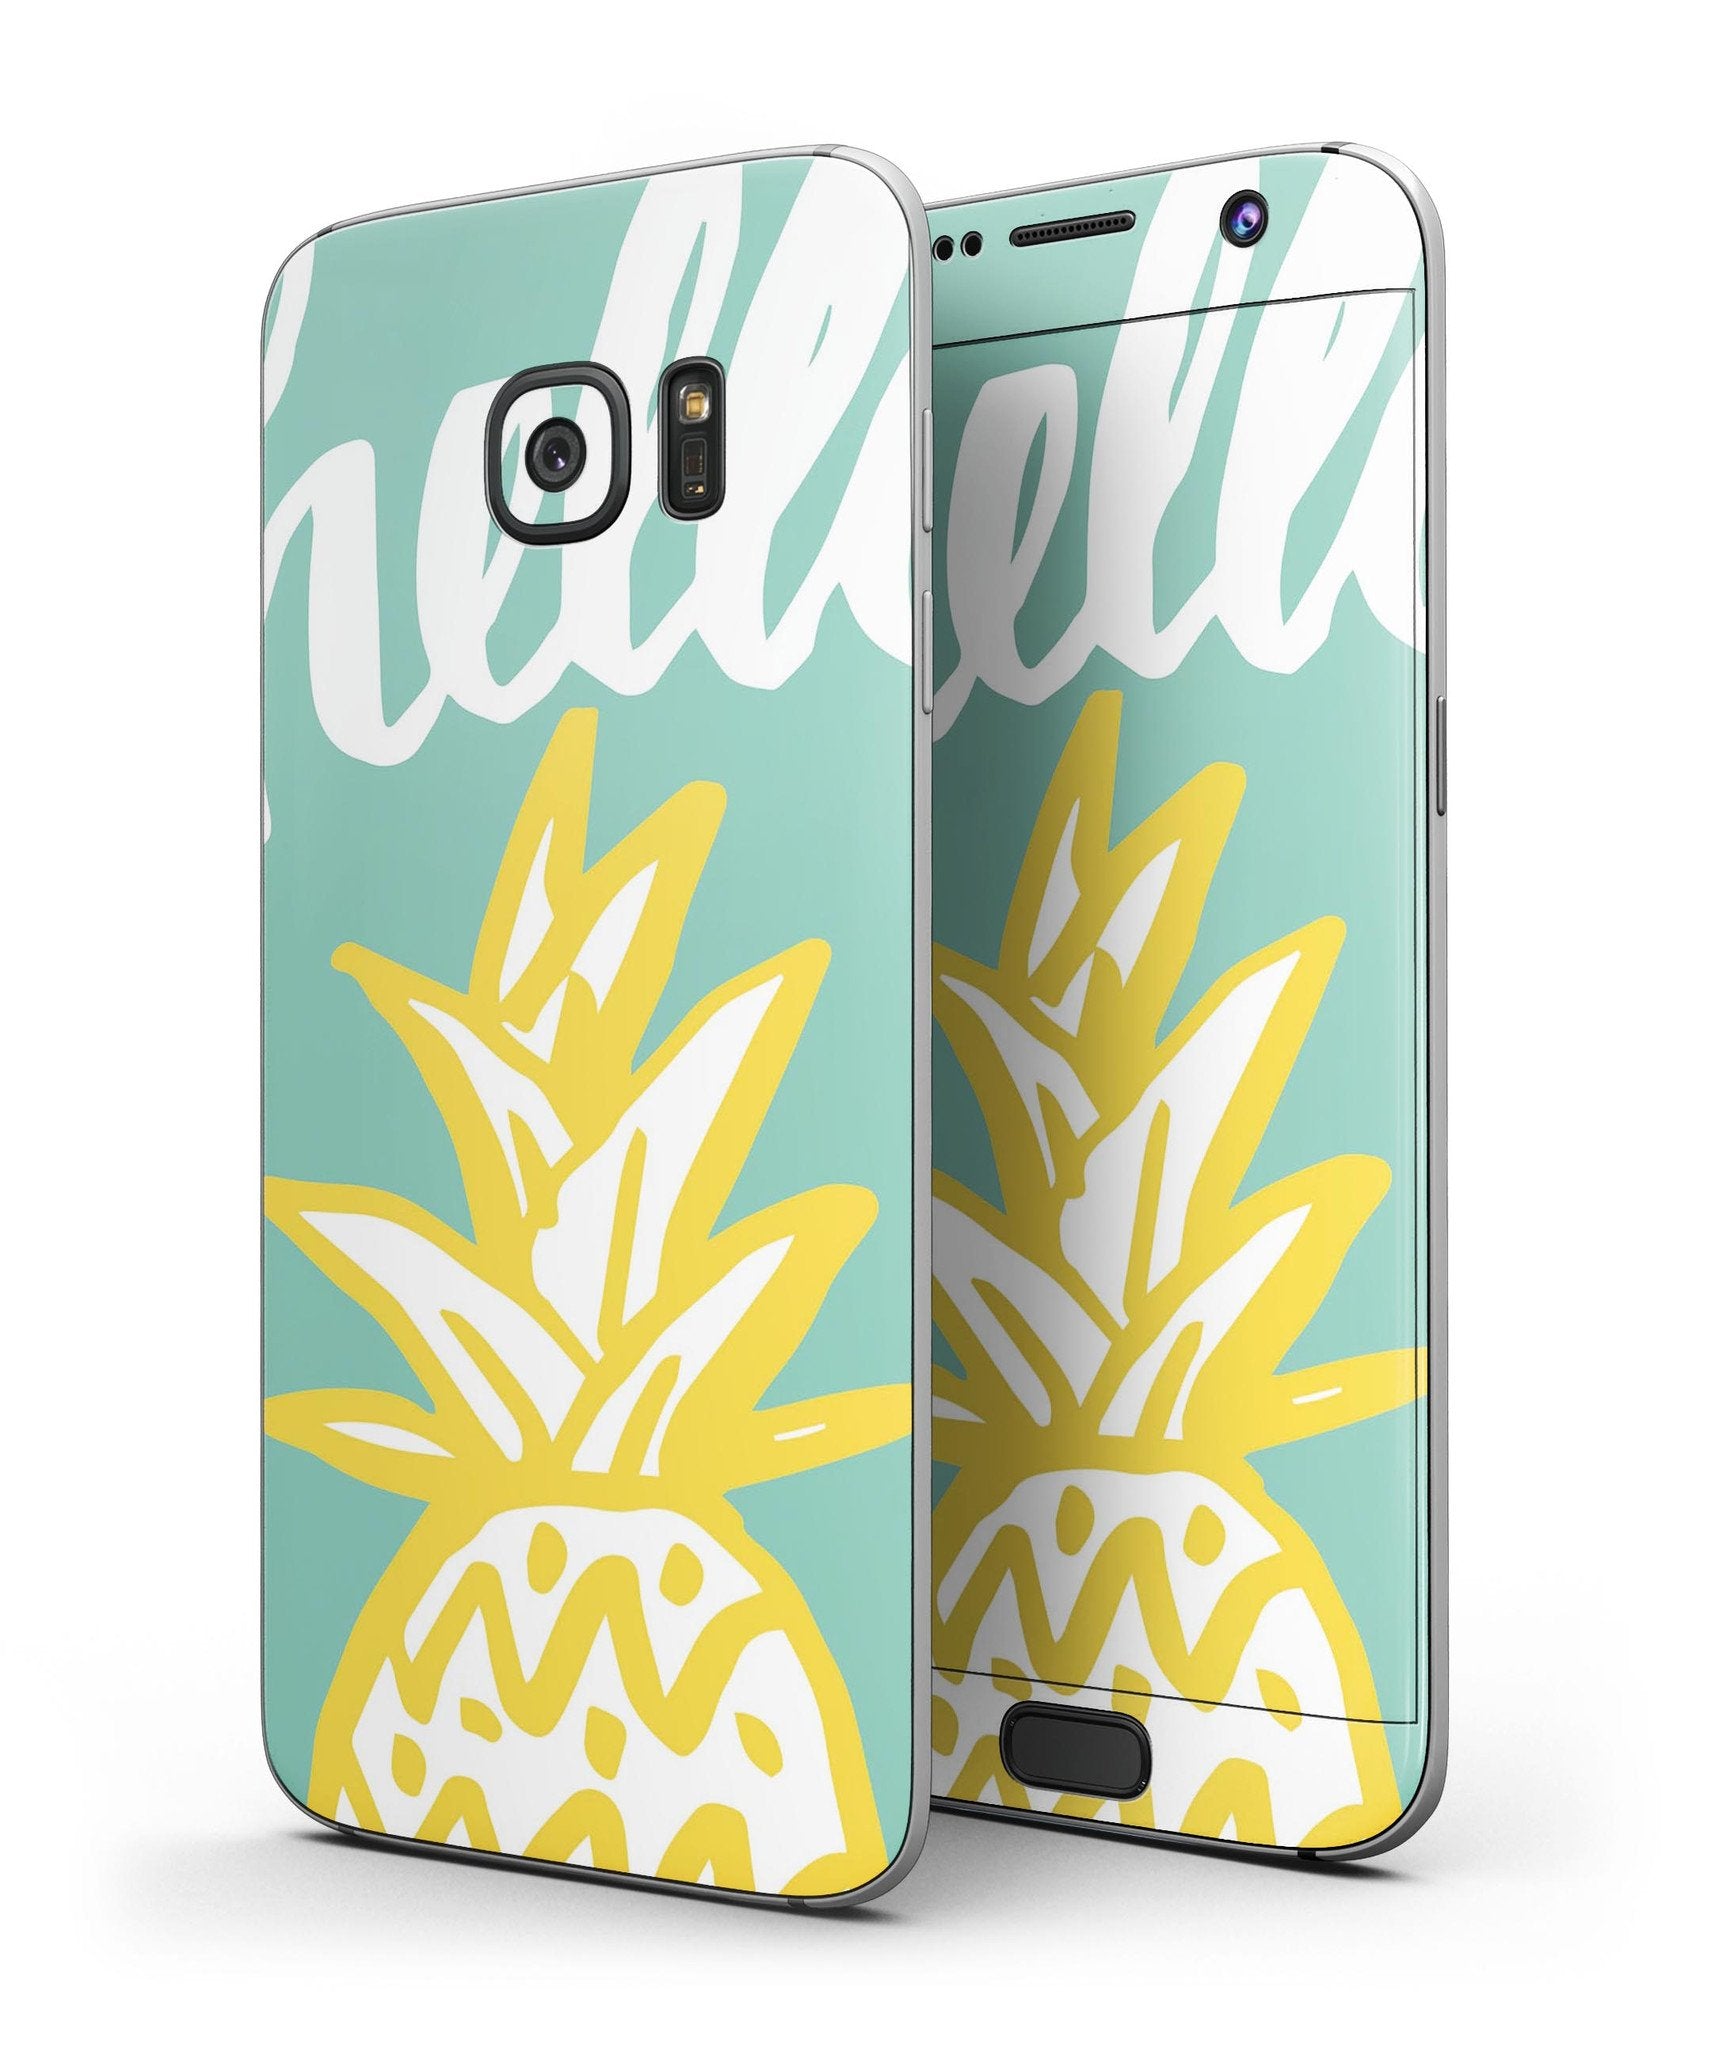 Well Hello Pineapple - Full Body Skin-Kit for the Samsung Galaxy S7 or | Blue Leto